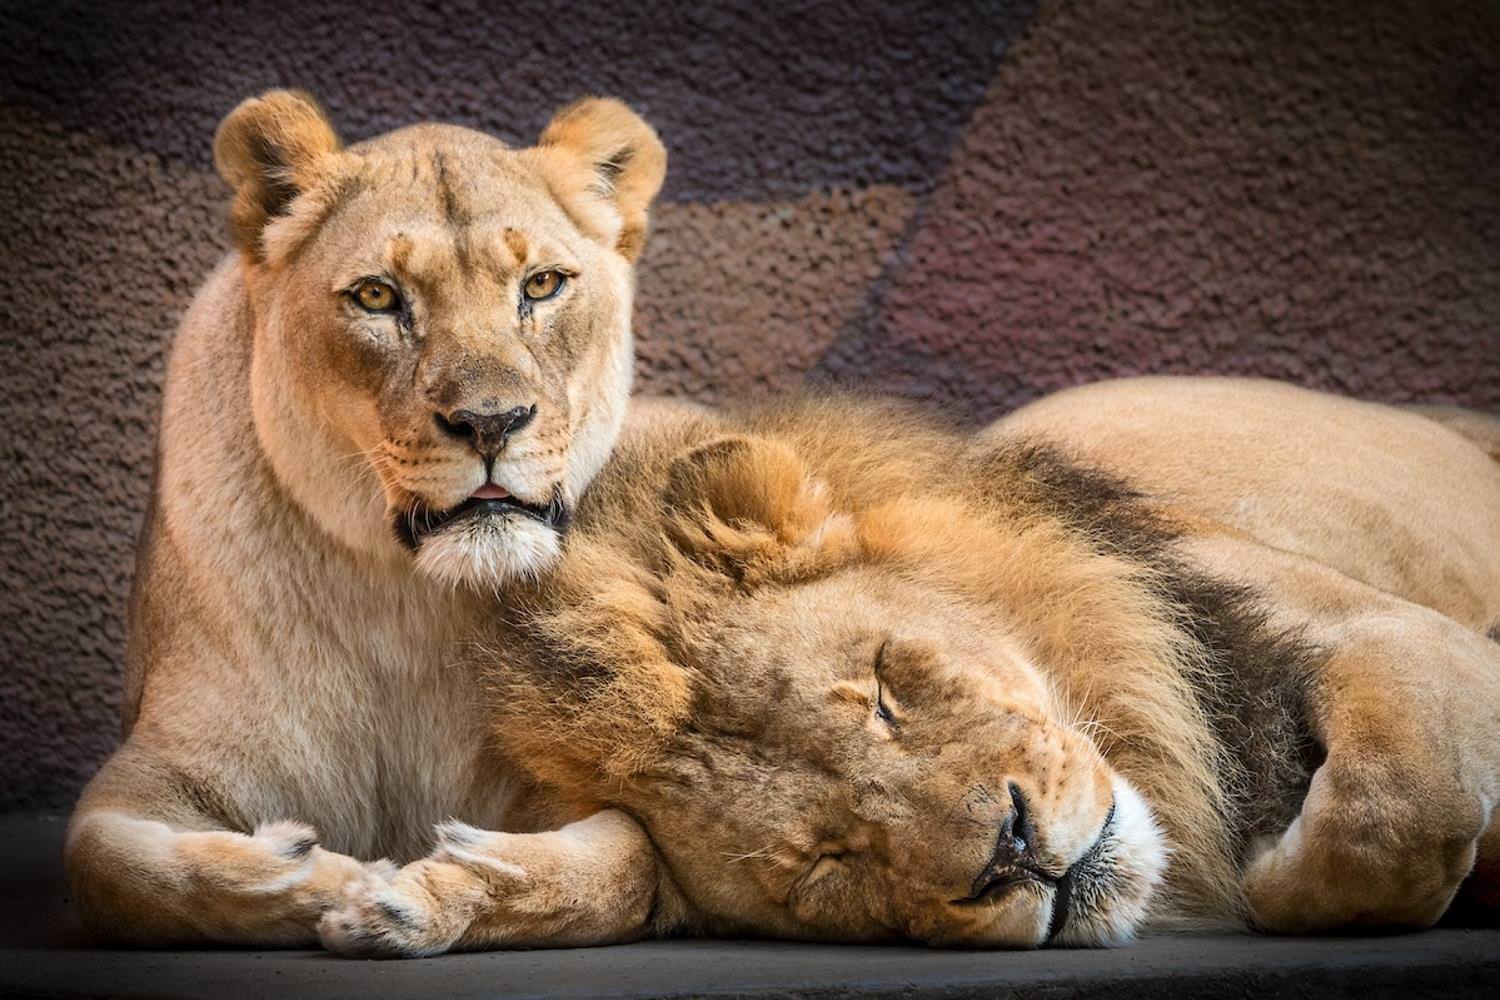 Hubert and Kalisa, two loving lions who were euthanized